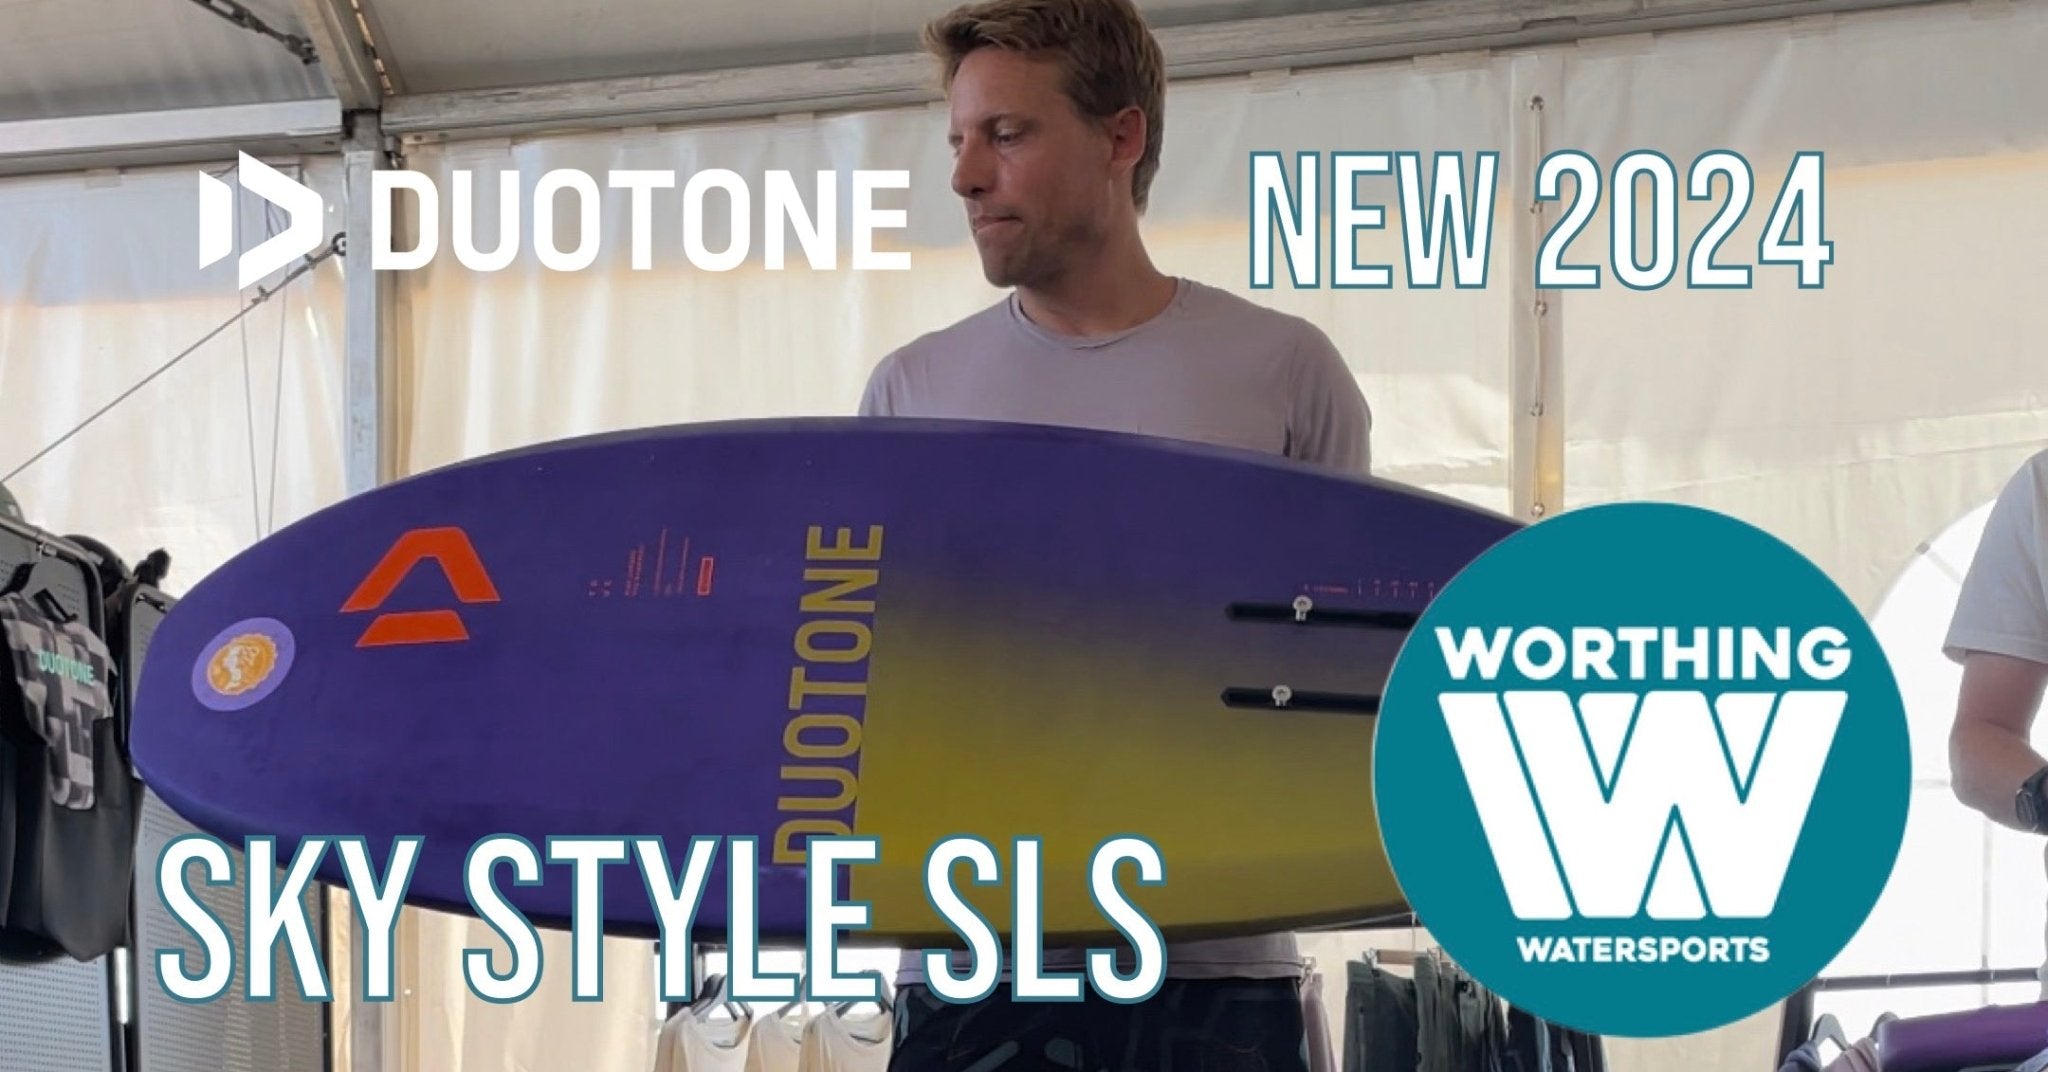 Video - New Duotone Sky Style SLS 2024 - Worthing Watersports